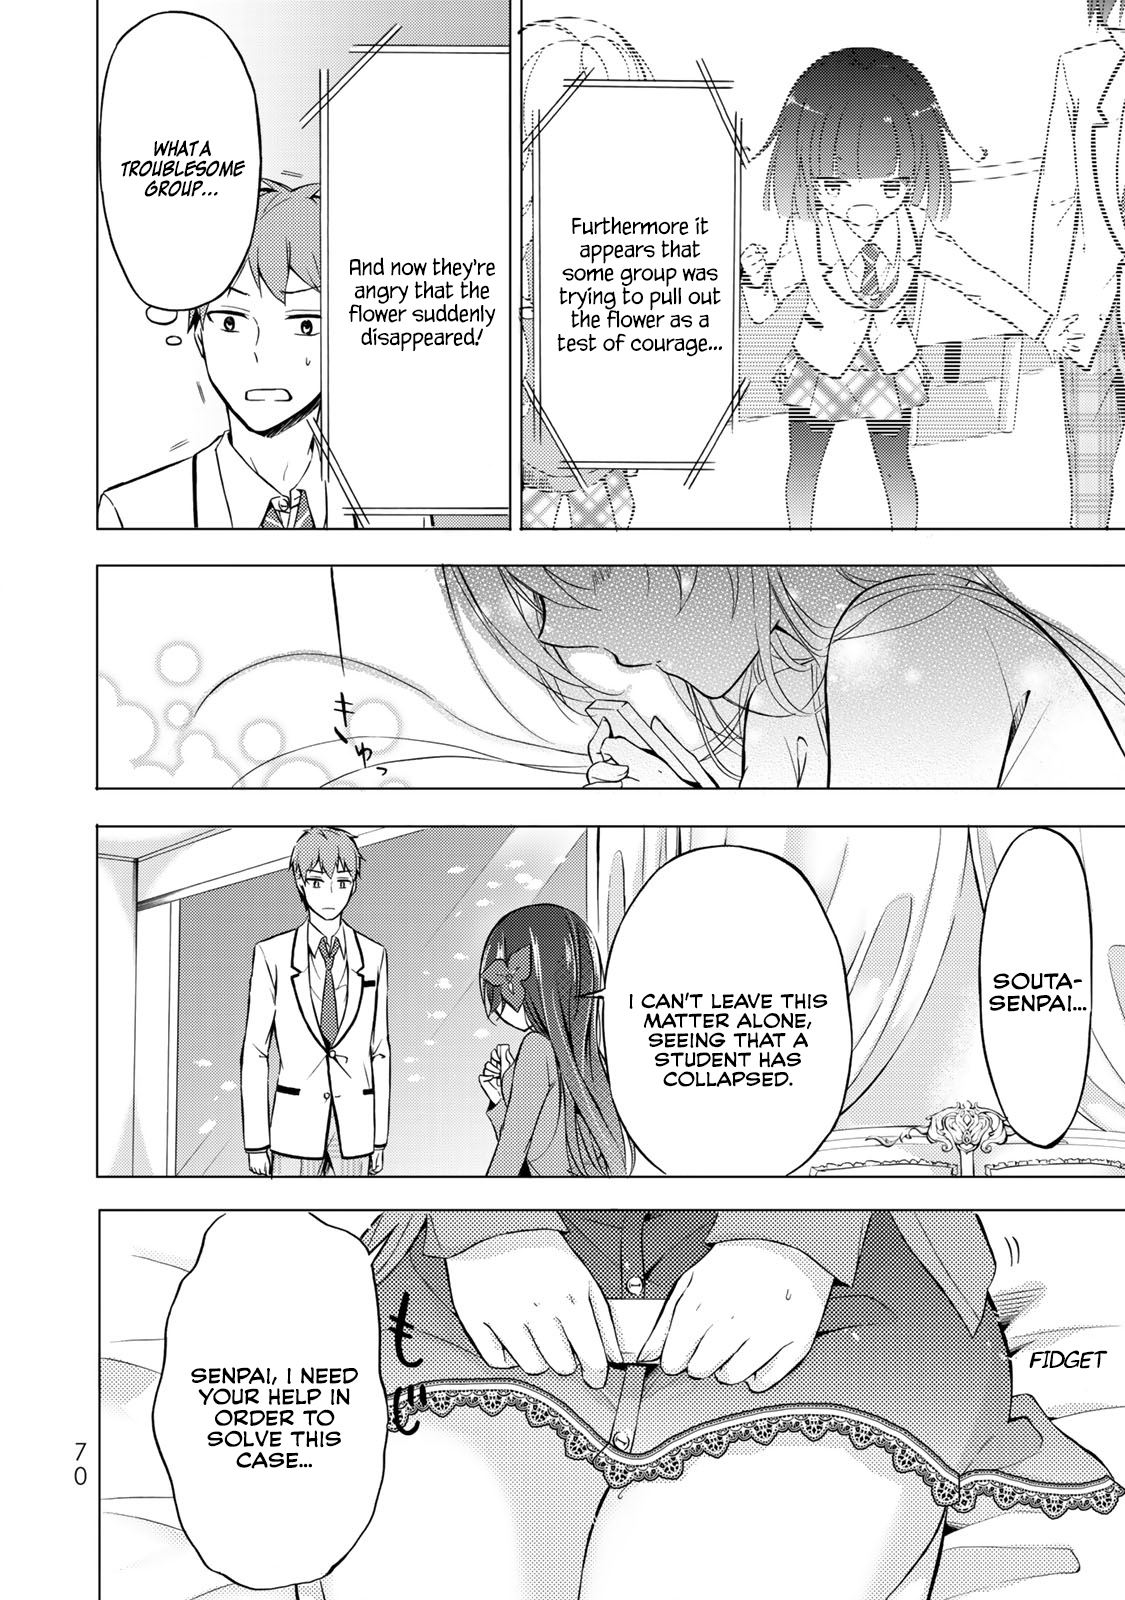 The Student Council President Solves Everything on the Bed Vol. 1 Ch. 2 The Never Blooming Garden Part 1